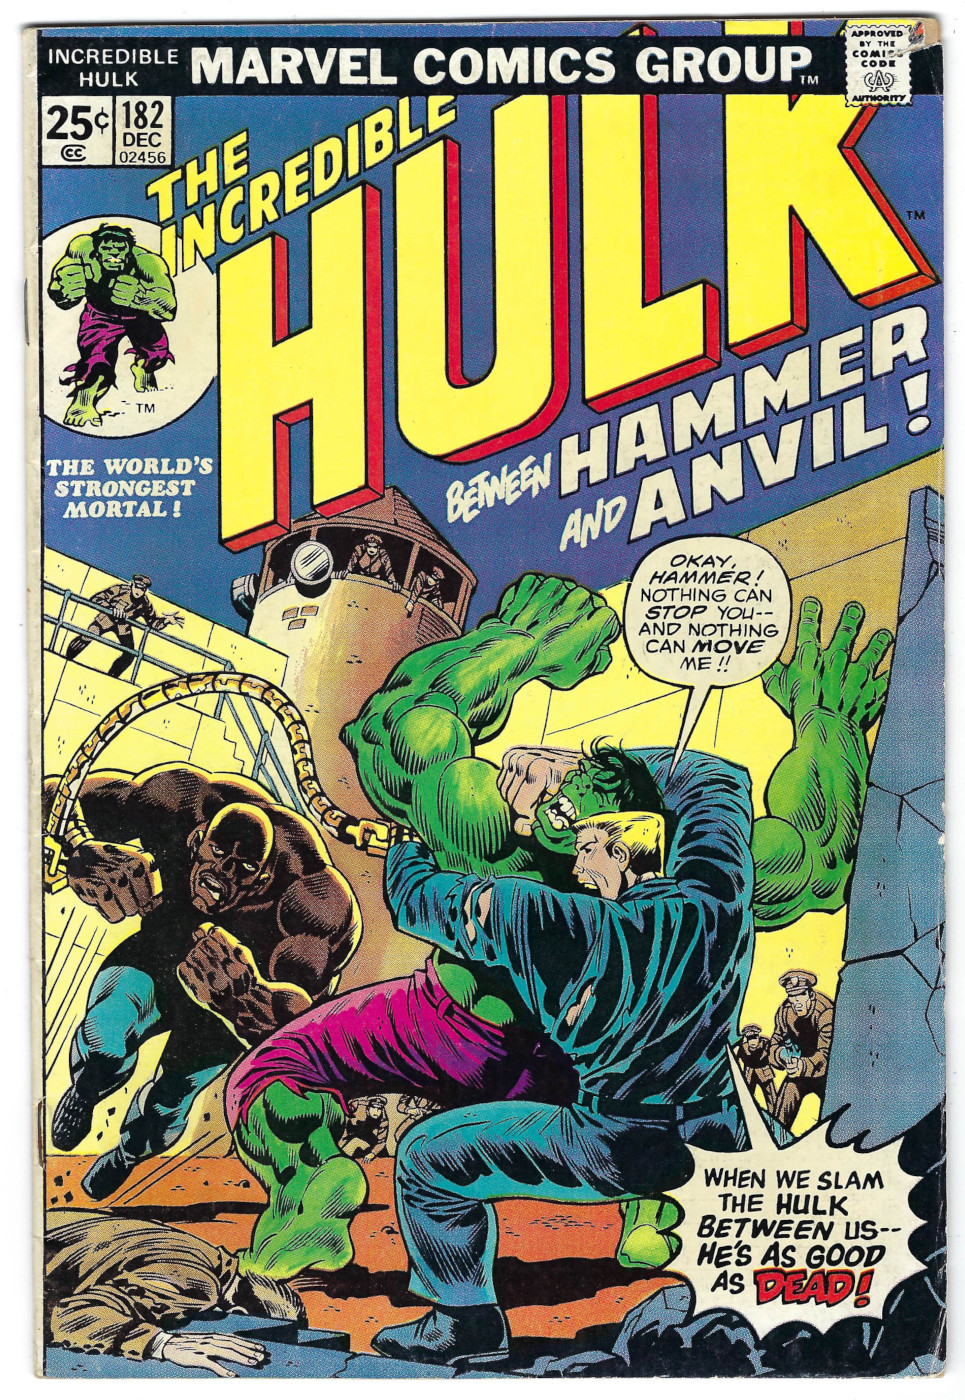 Marvel Comics Incredible Hulk #182: 3rd Appearance of Wolverine 1